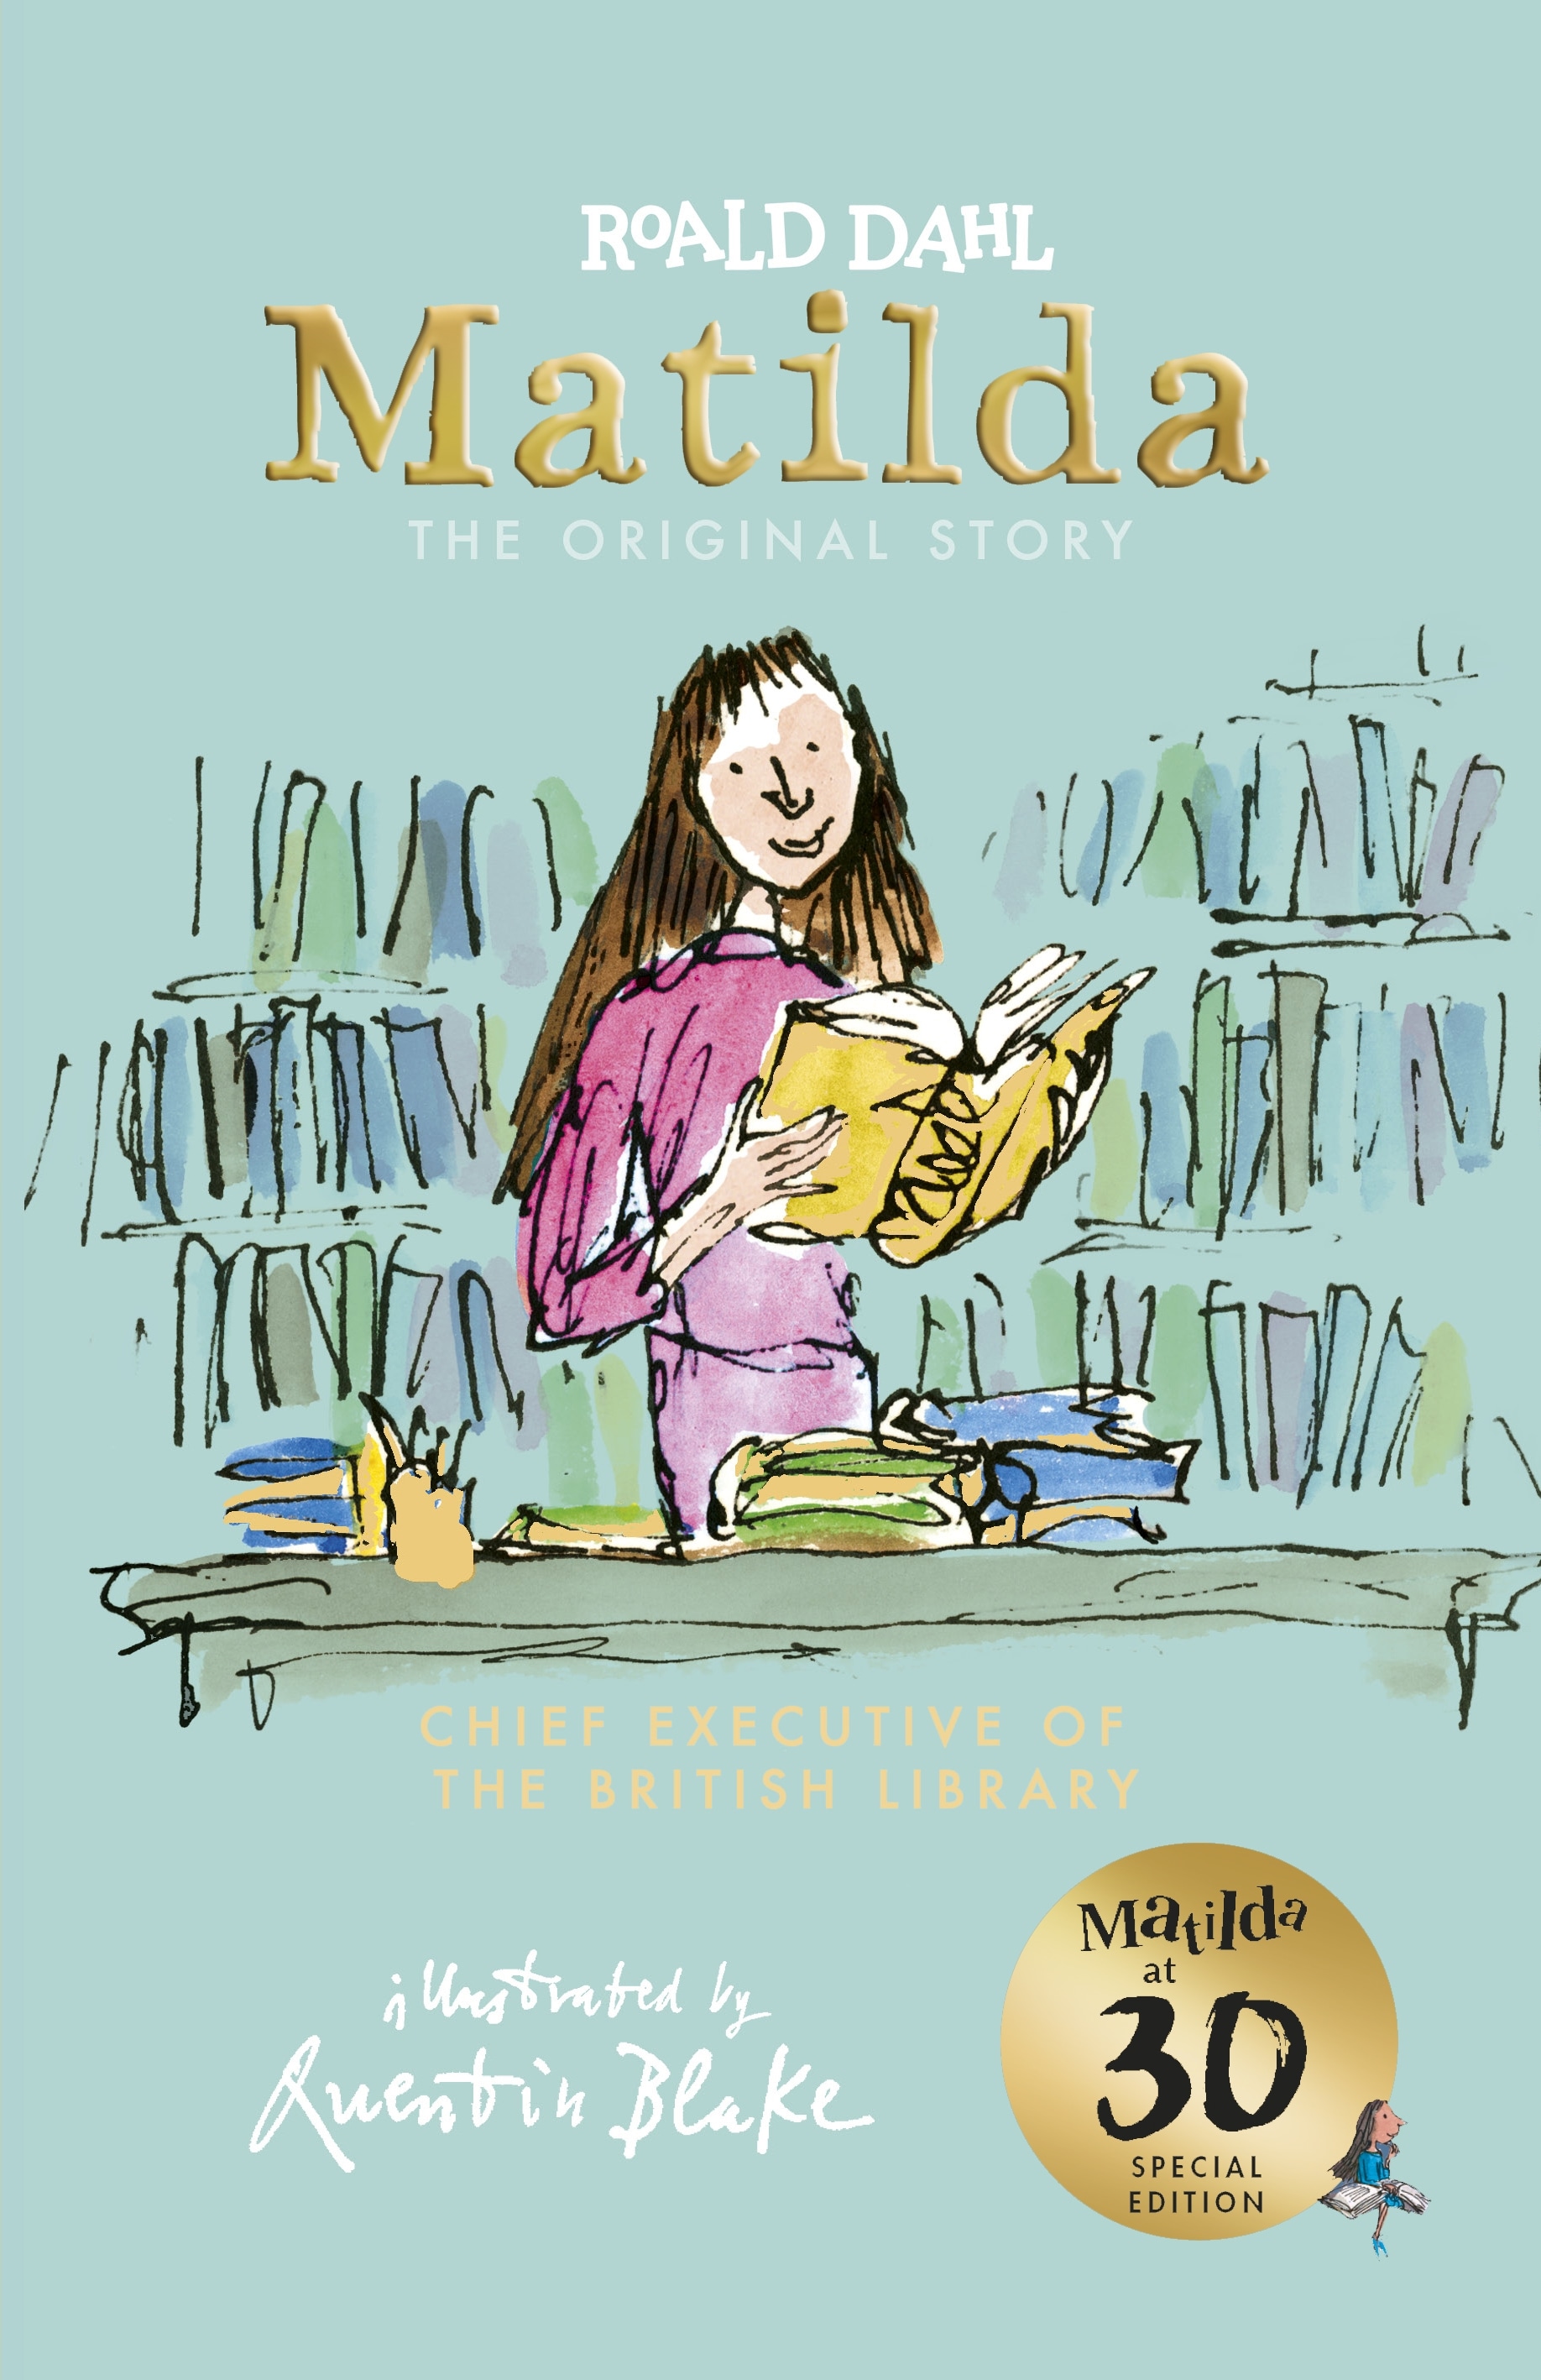 Book “Matilda at 30: Chief Executive of the British Library” by Roald Dahl, Quentin Blake — September 5, 2019